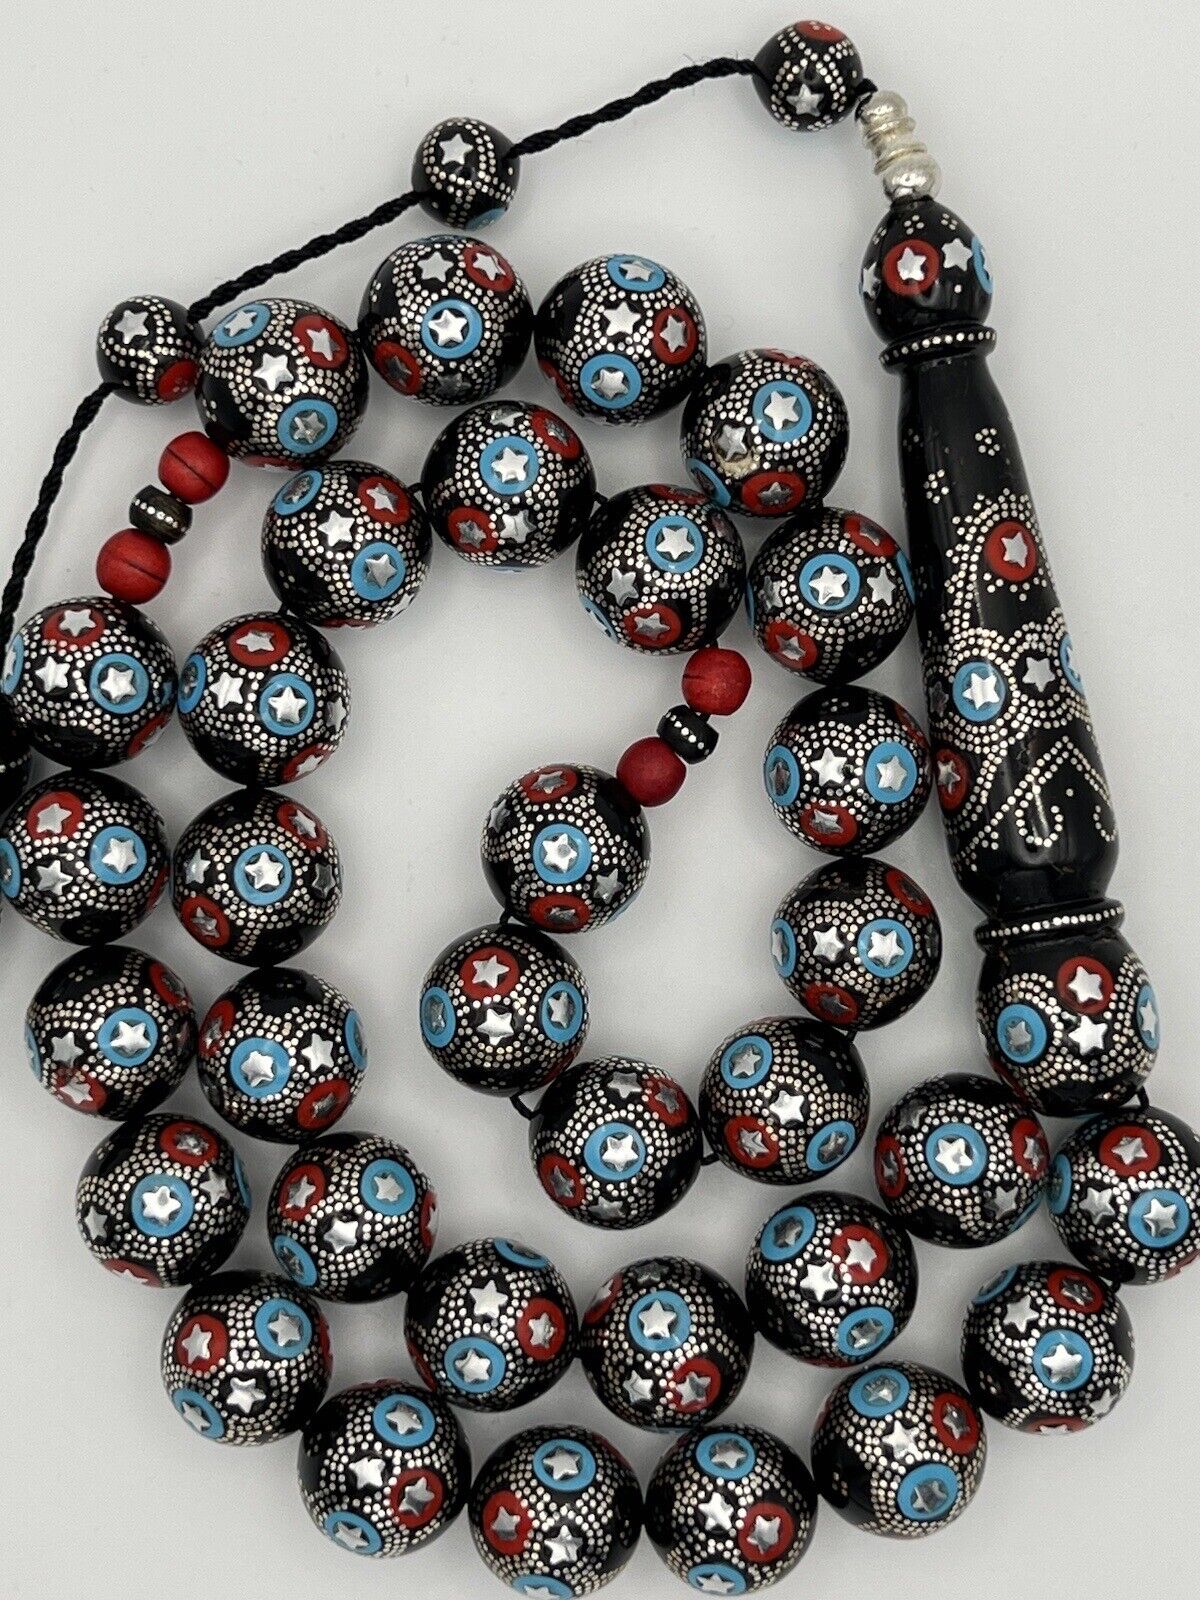 Black Coral Yusr Prayer Beads Inlaid Silver 925 Red Coral And Turquoise سبحة يسر